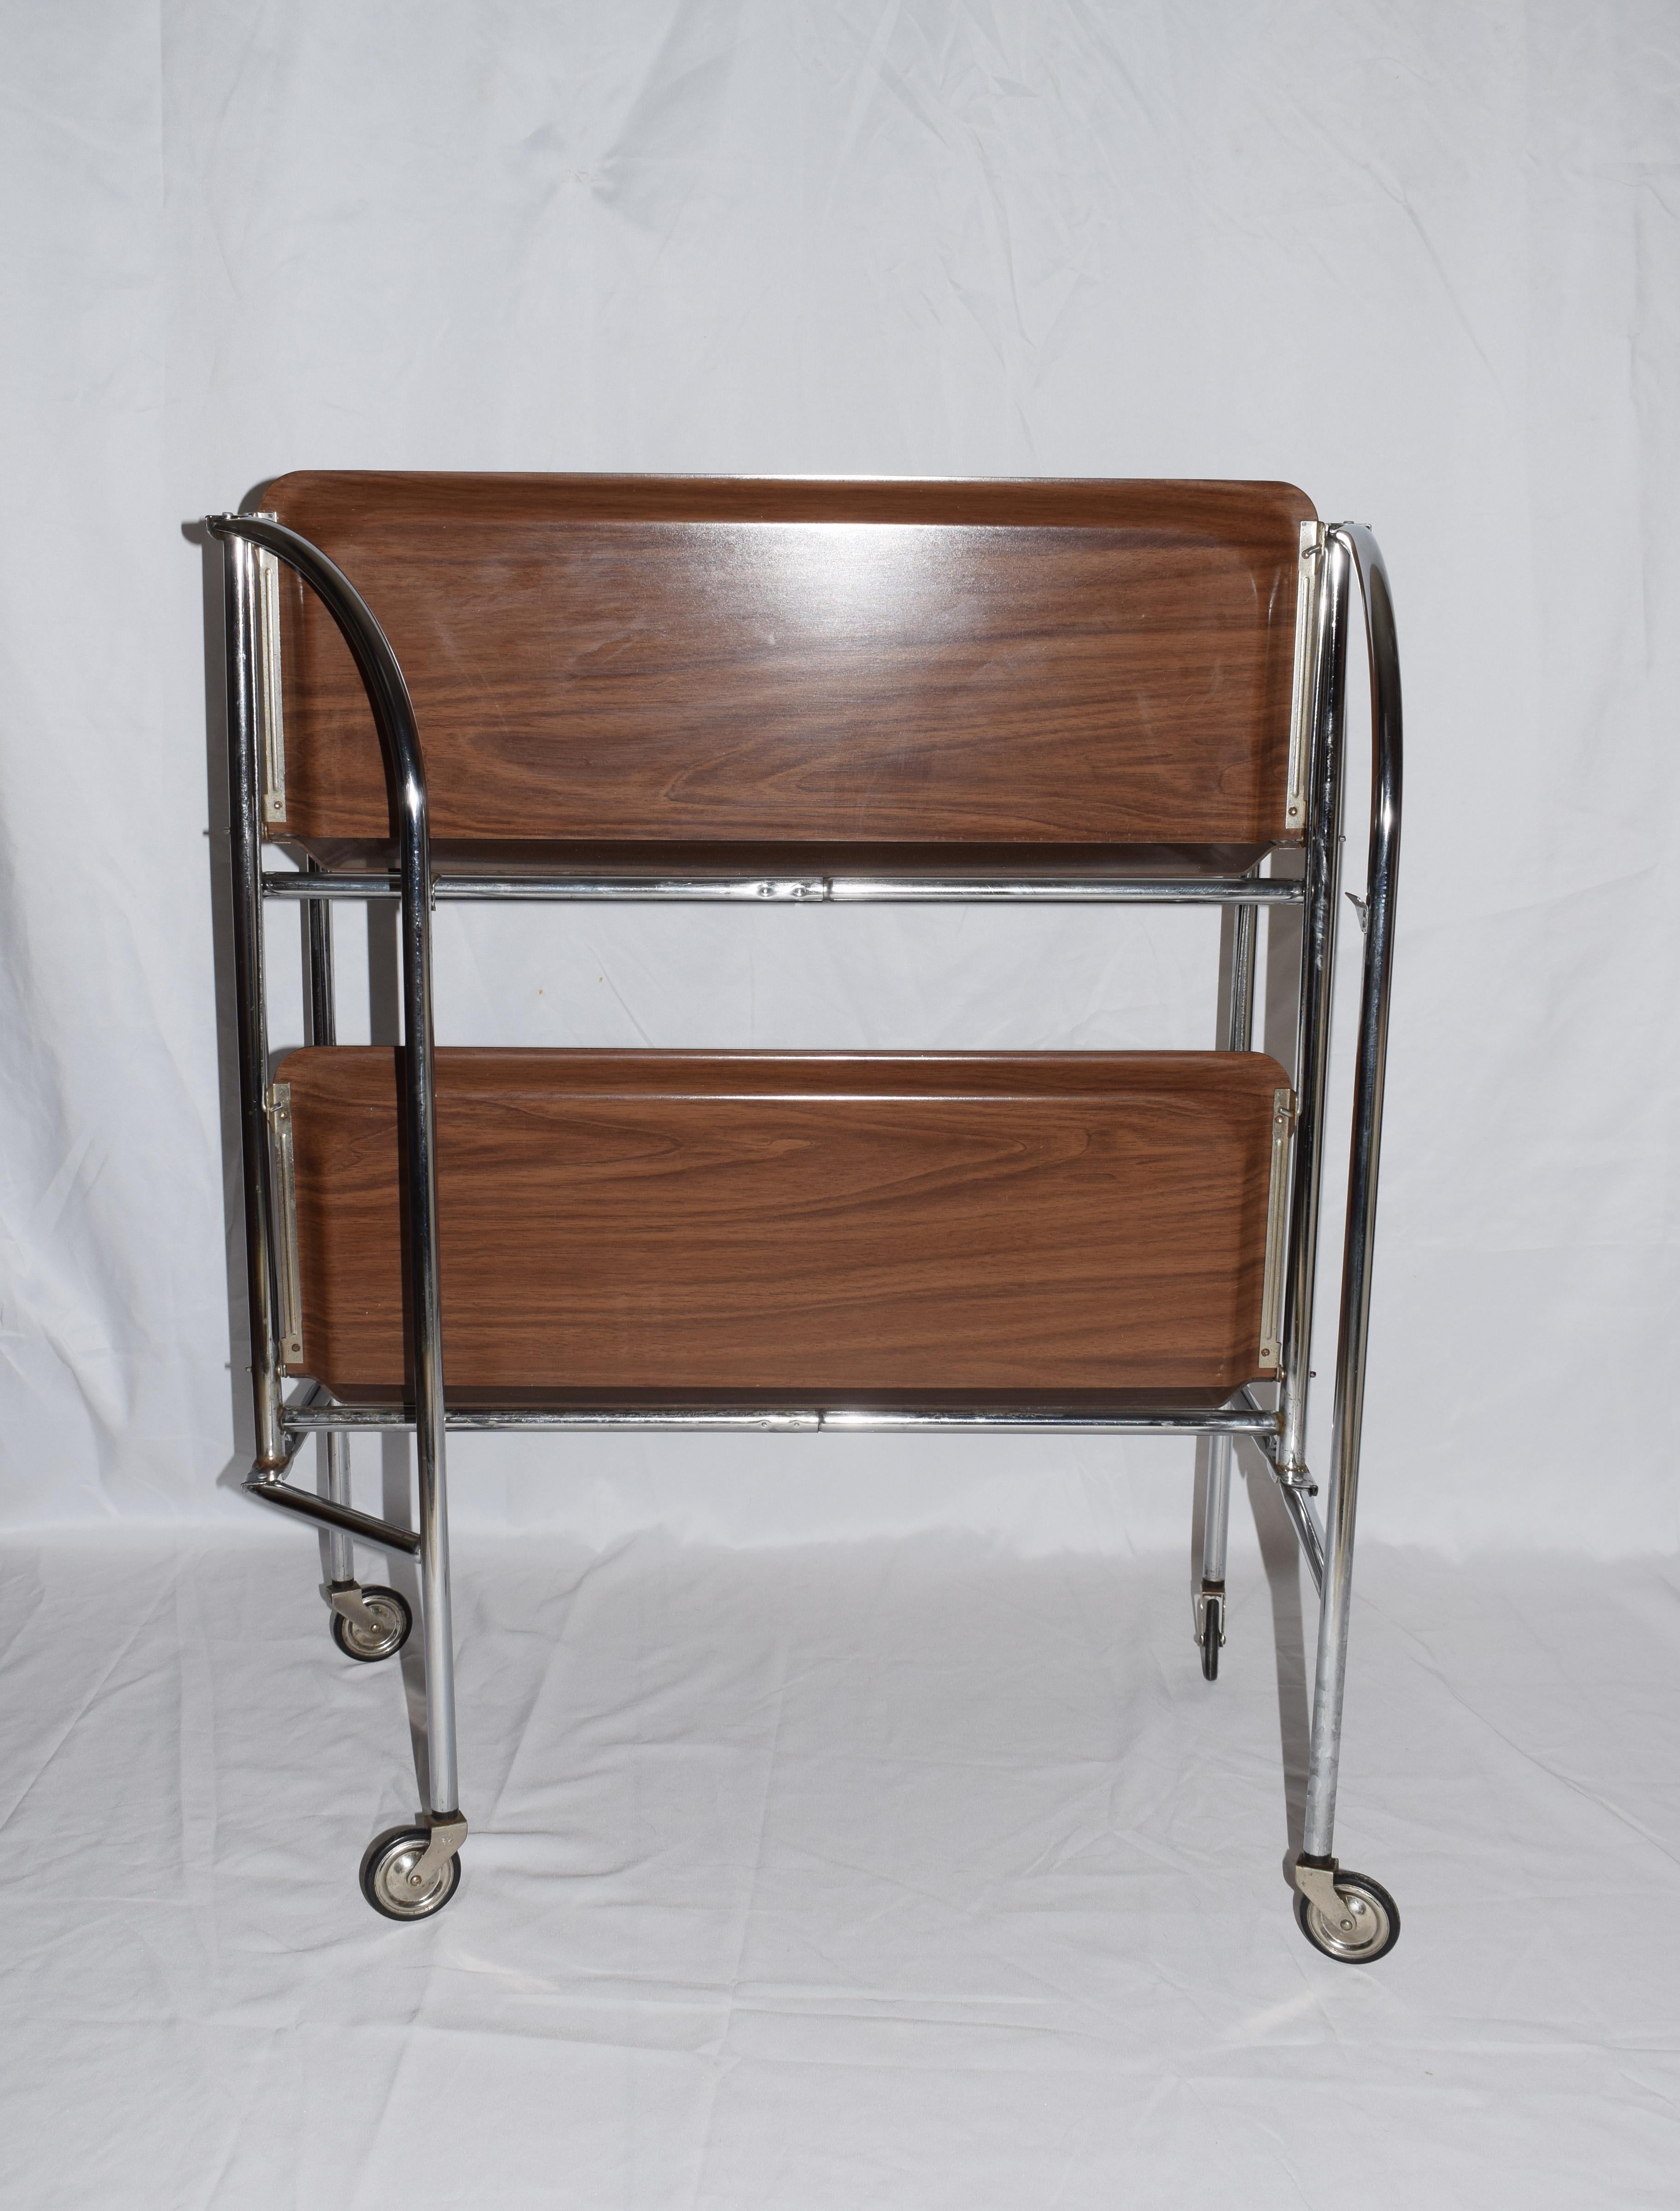 19th Century Mid-Century Bremshey & Co Dinette Trolley circa 1950s